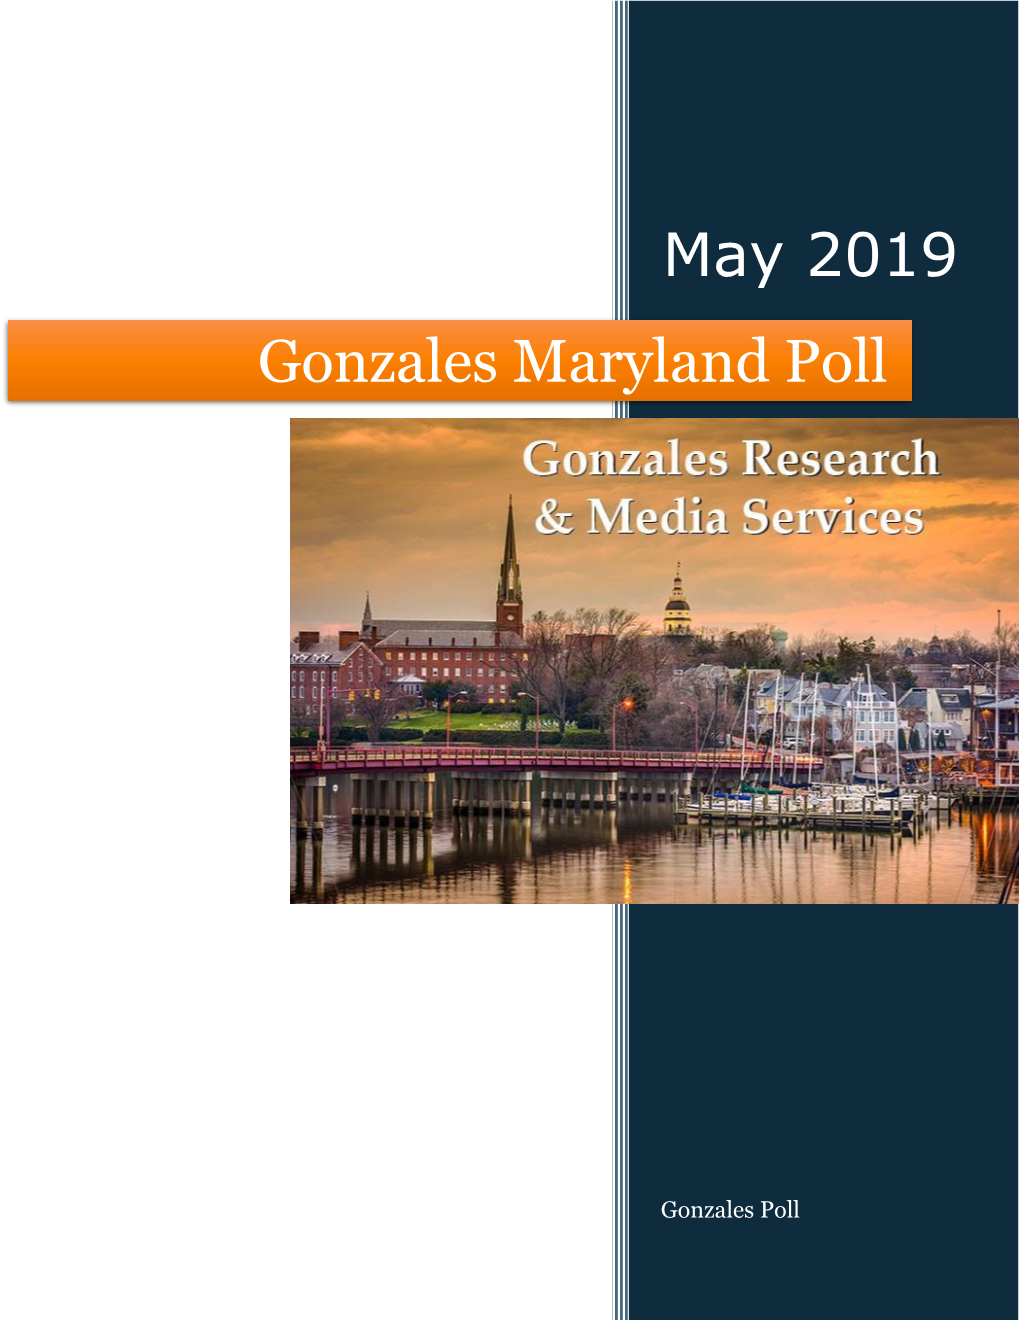 Gonzales Maryland Poll